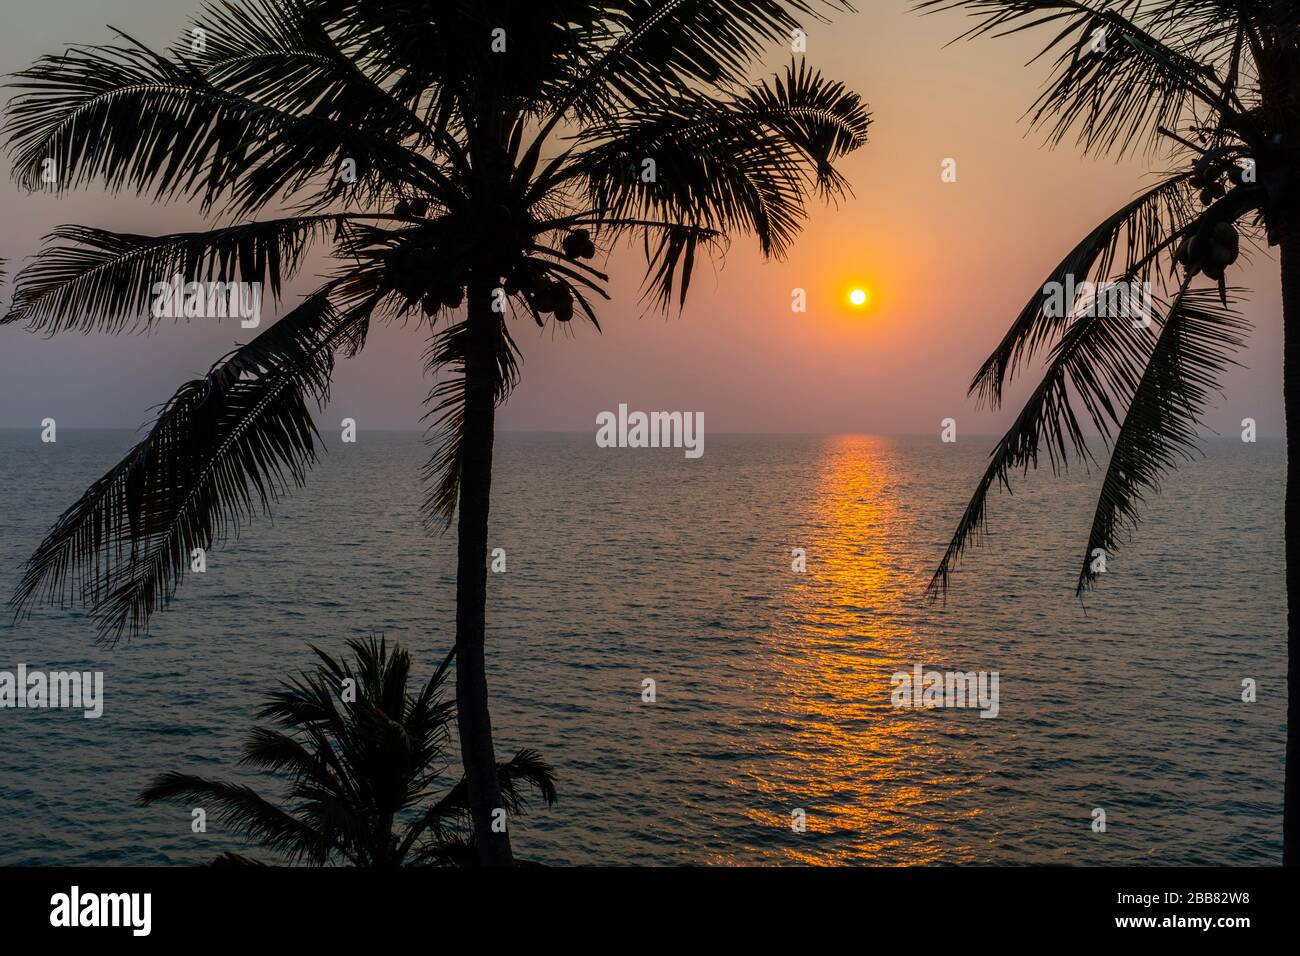 Sunset on dark waters with palm trees in foreground, with no people Kerala, India Stock Photo